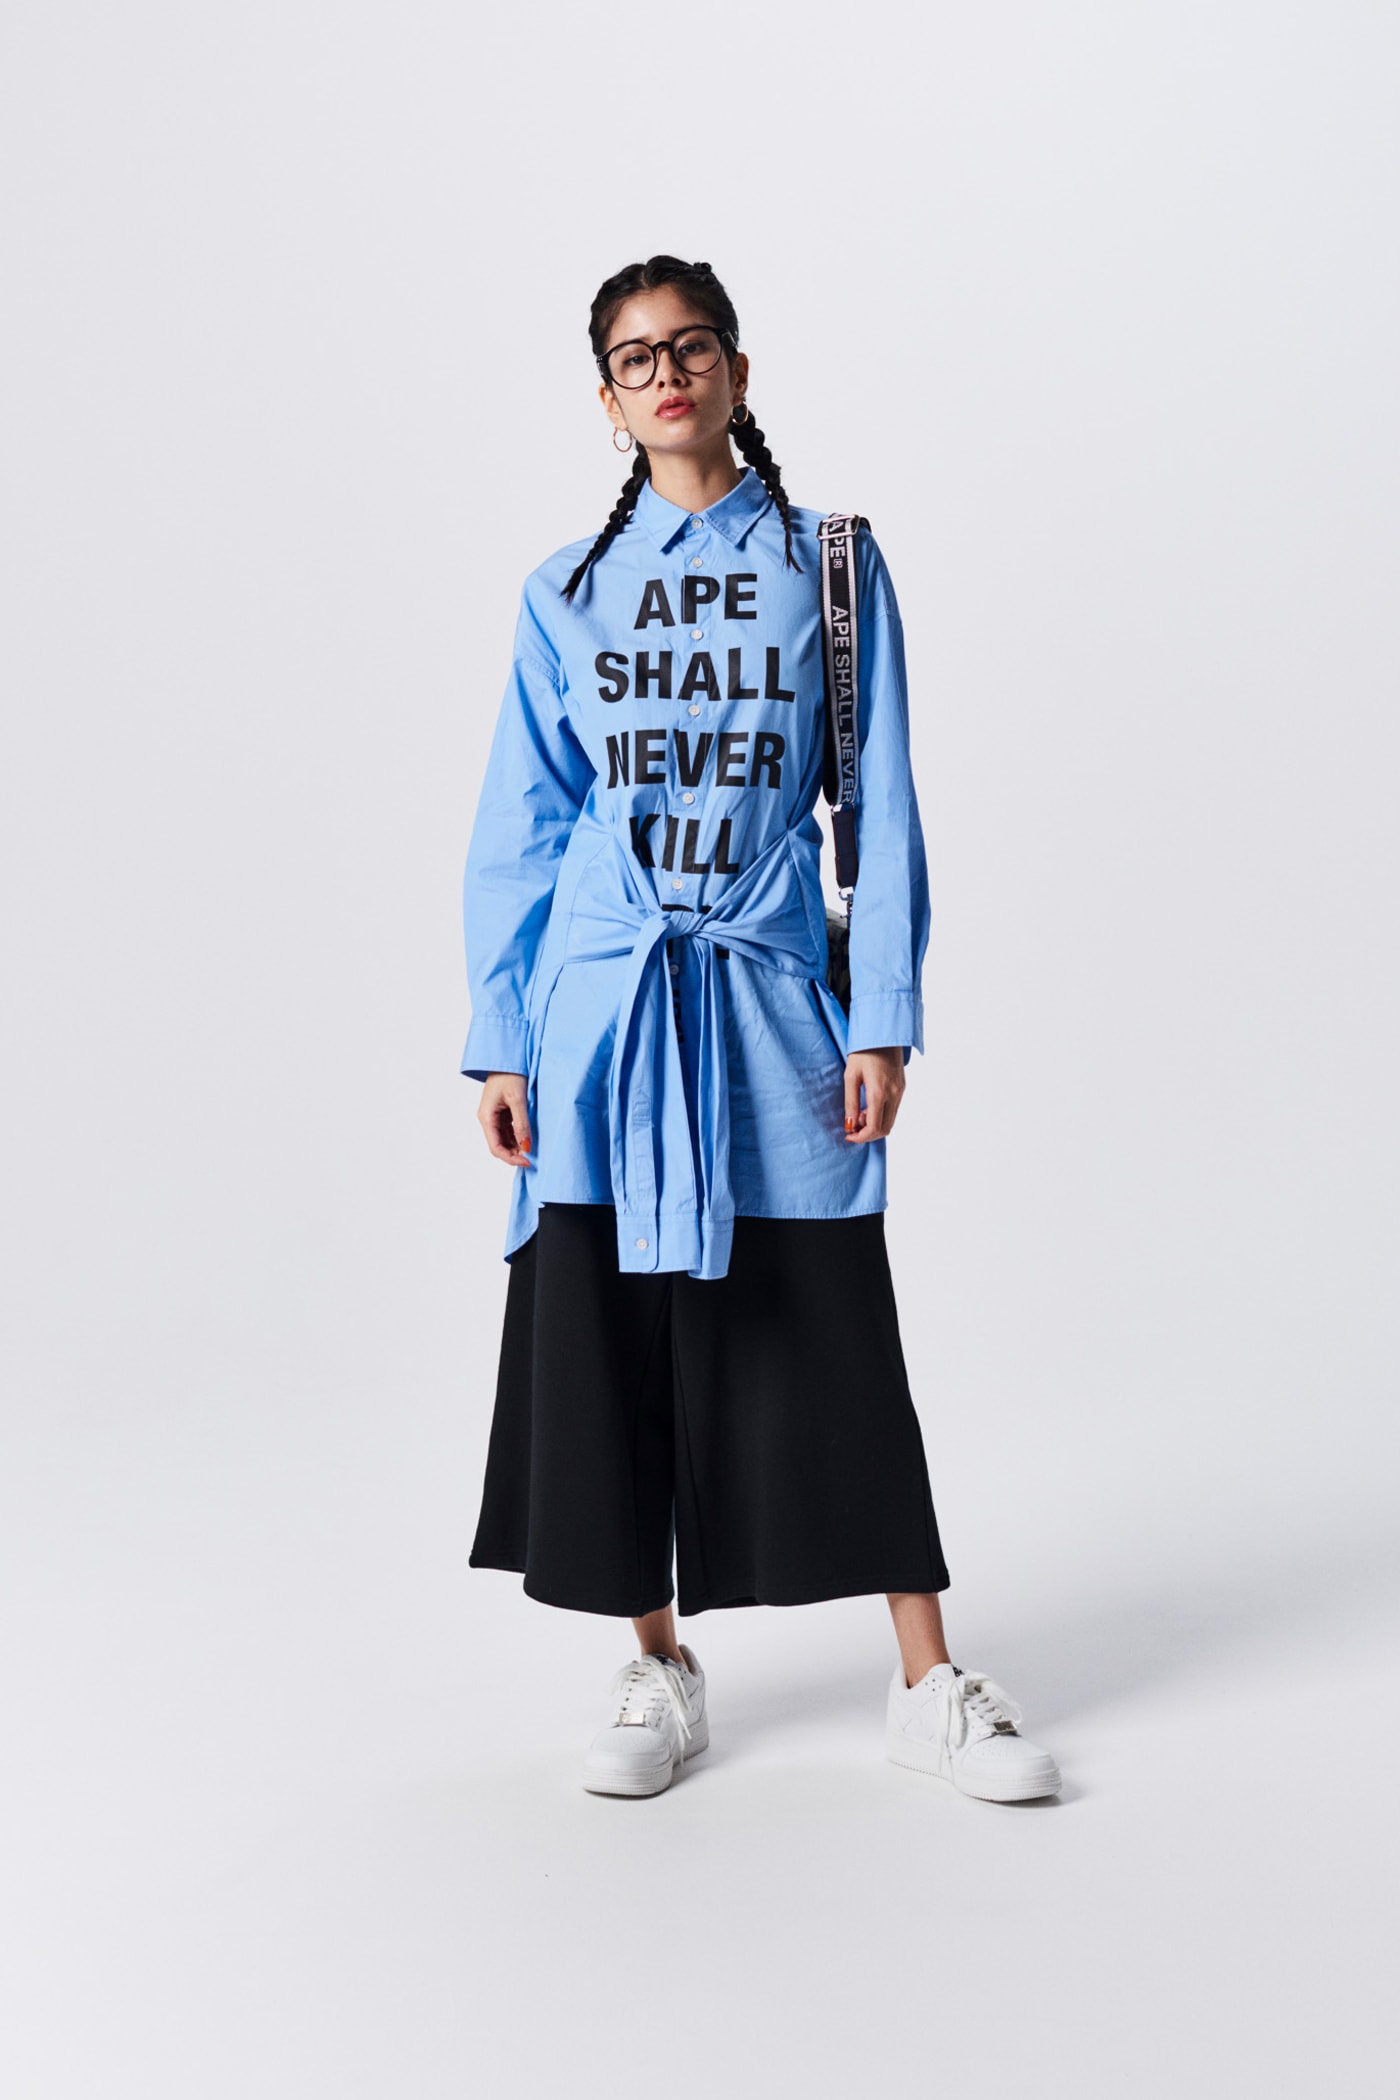 A Bathing Ape Spring Summer 2019 Collection Lookbook Collared Shirt Blue Culottes Black